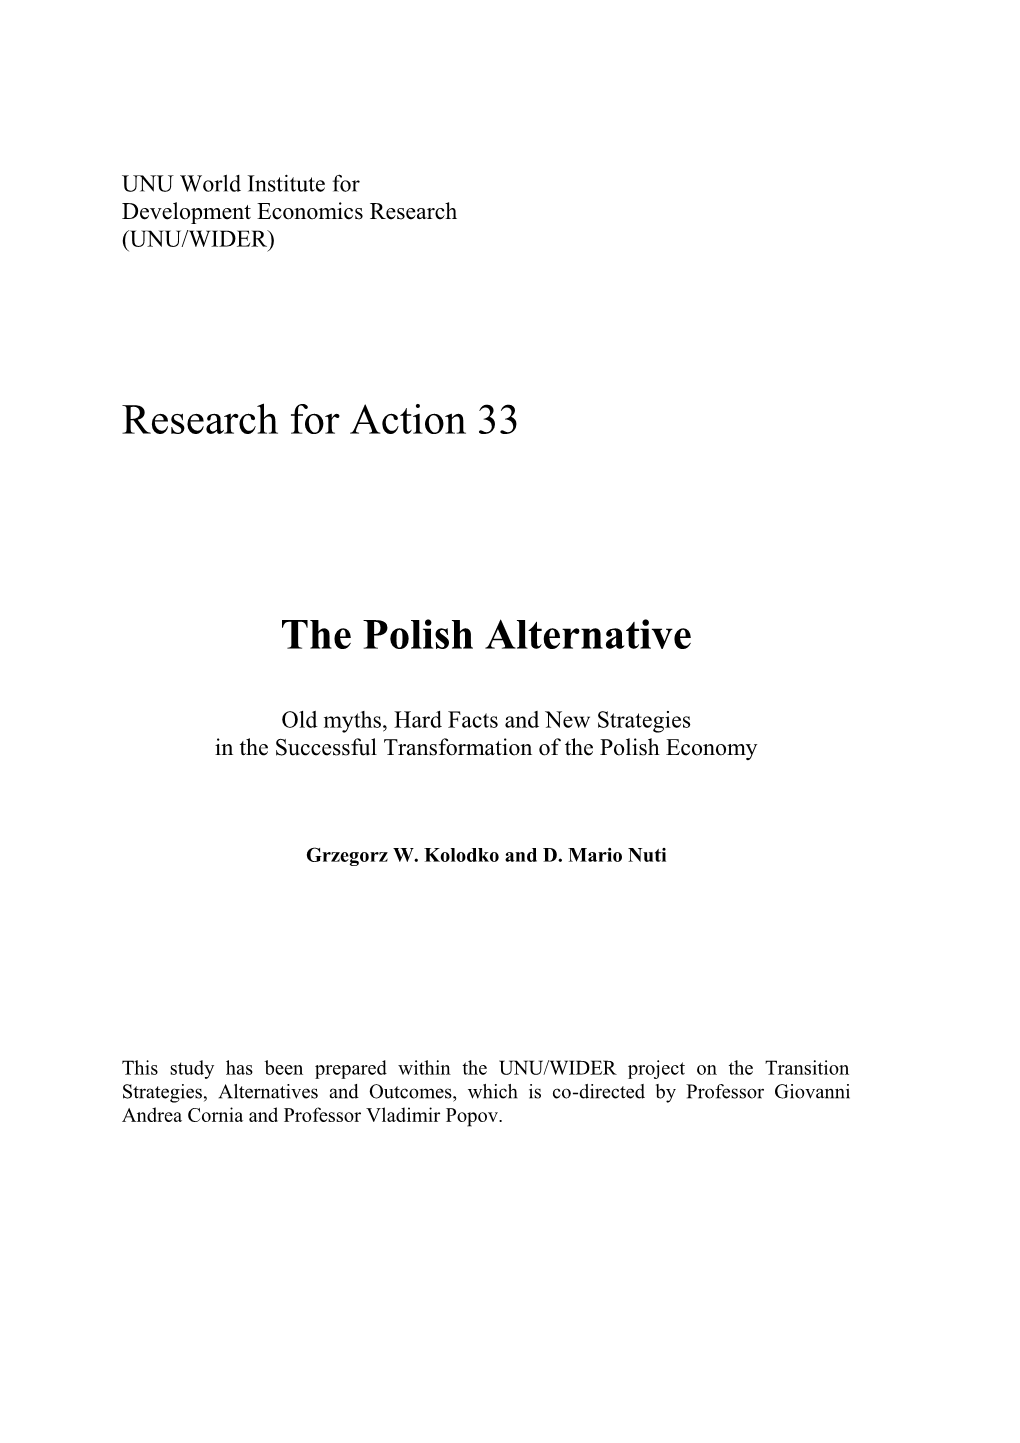 The Polish Alternative. Old Myths, Hard Facts and New Strategies of the Successful